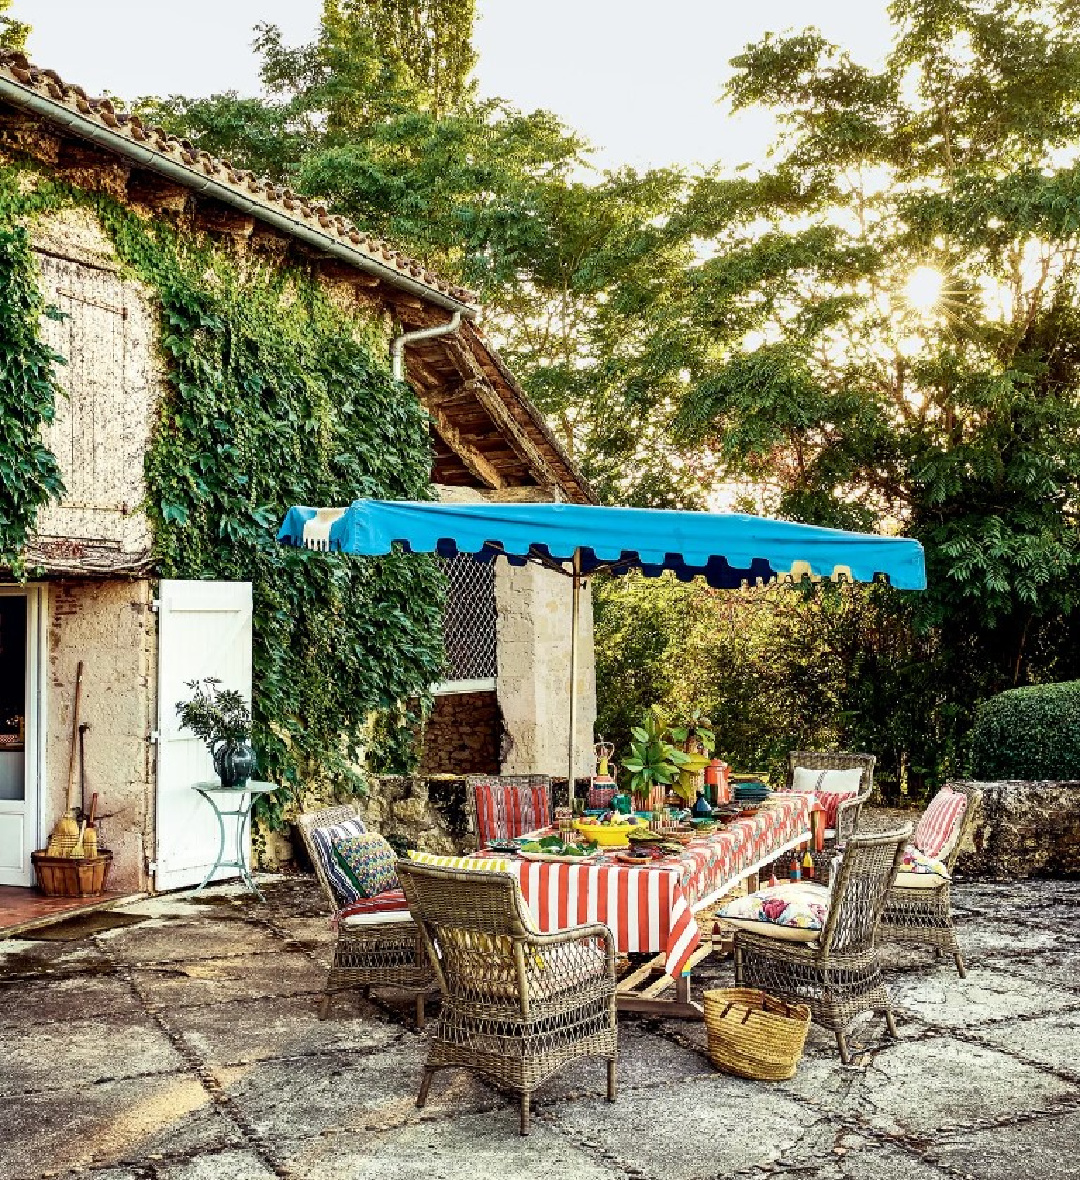 Outdoor dining at a 19th century French cottage in Toulouse by Lucinda Chambers - photo by Paul Massey. #frenchcottage #frenchfarmhouse #interiordesignl